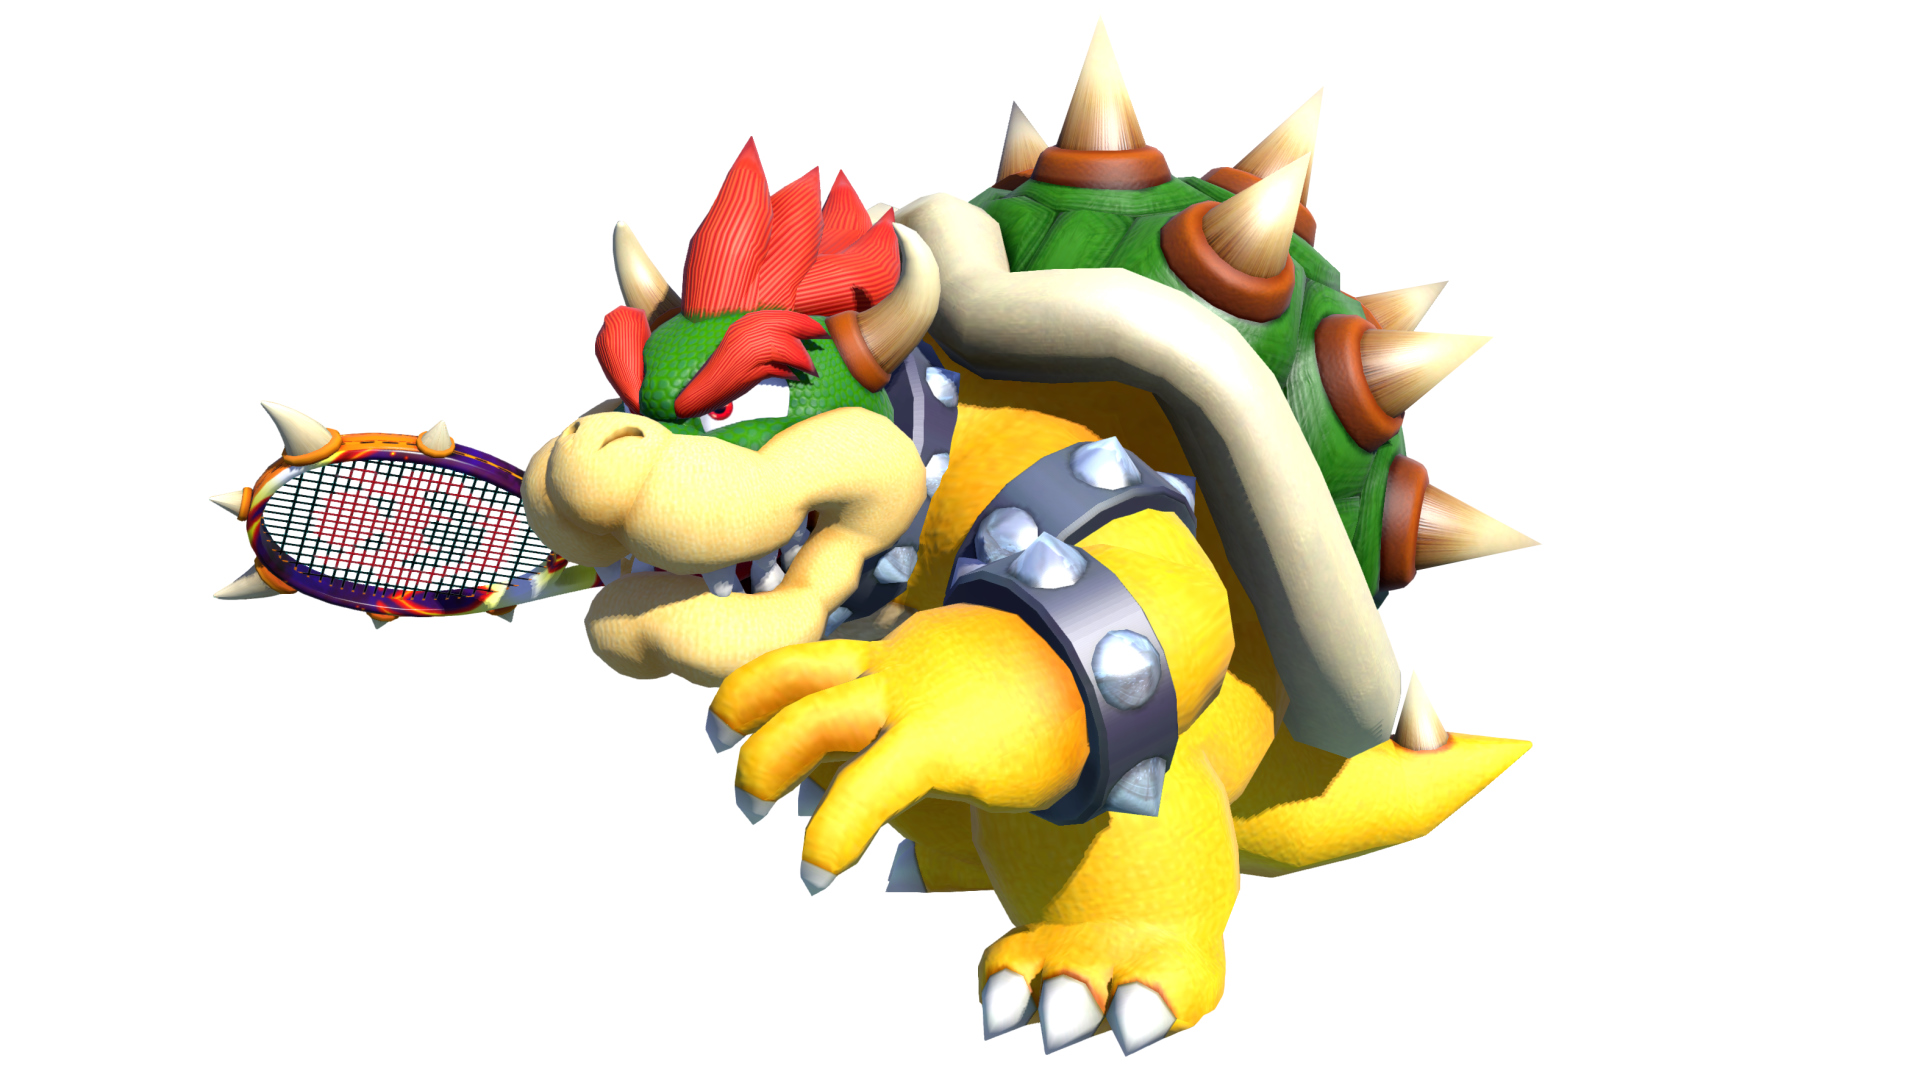 I wouldn't count on winning a tennis match against Lady Dimitrescu, Bowser buddy. (Image: Nintendo)